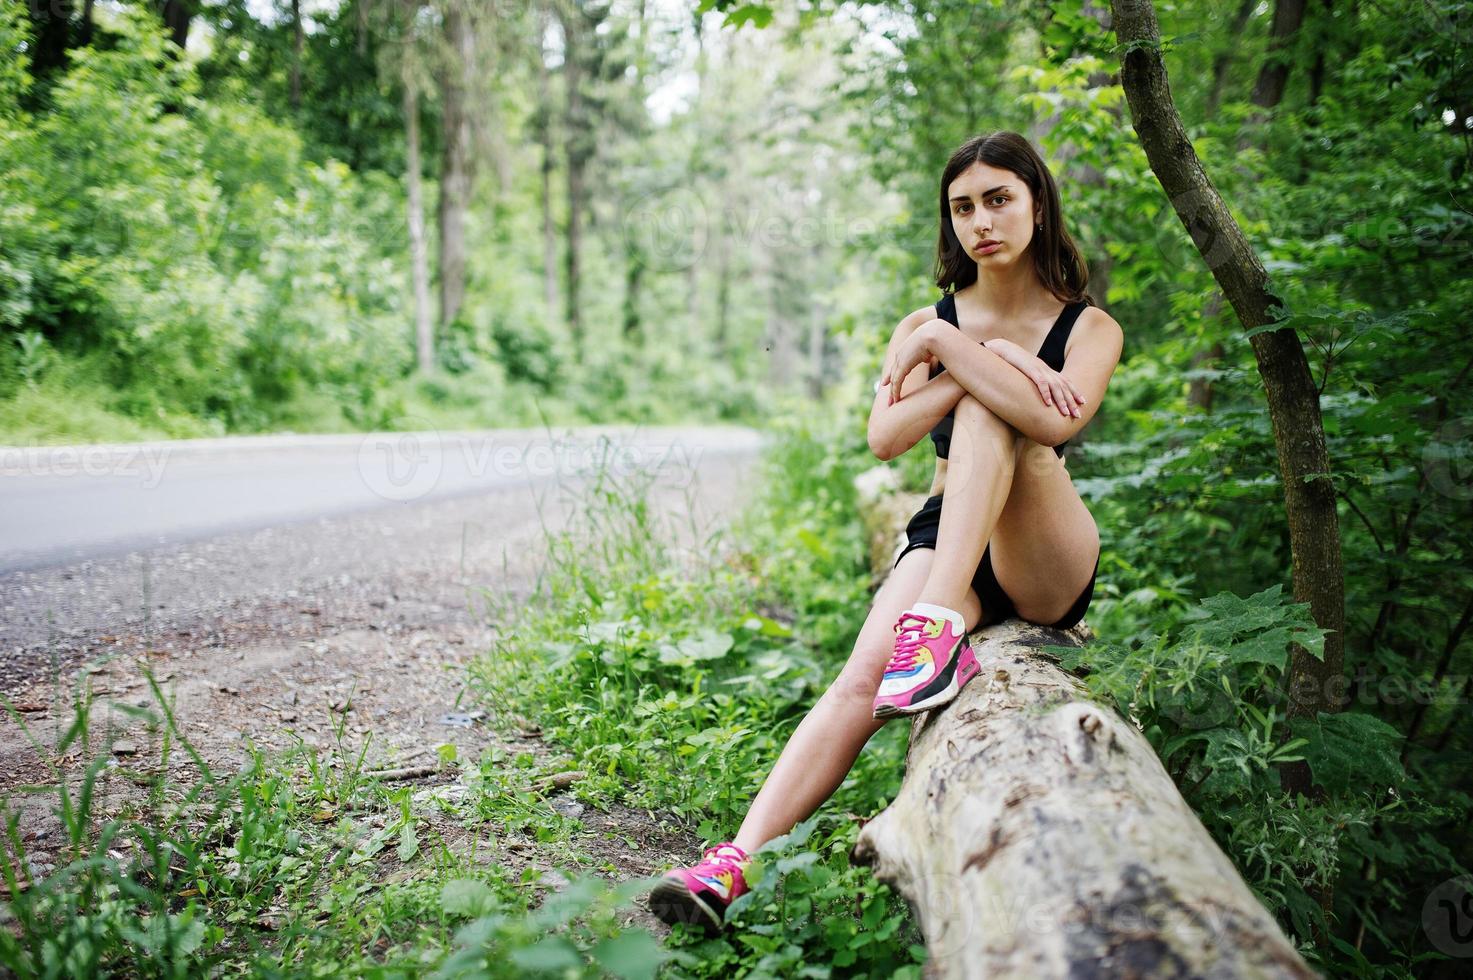 Sport girl at sportswear having rest in a green park after training at nature. A healthy lifestyle. photo